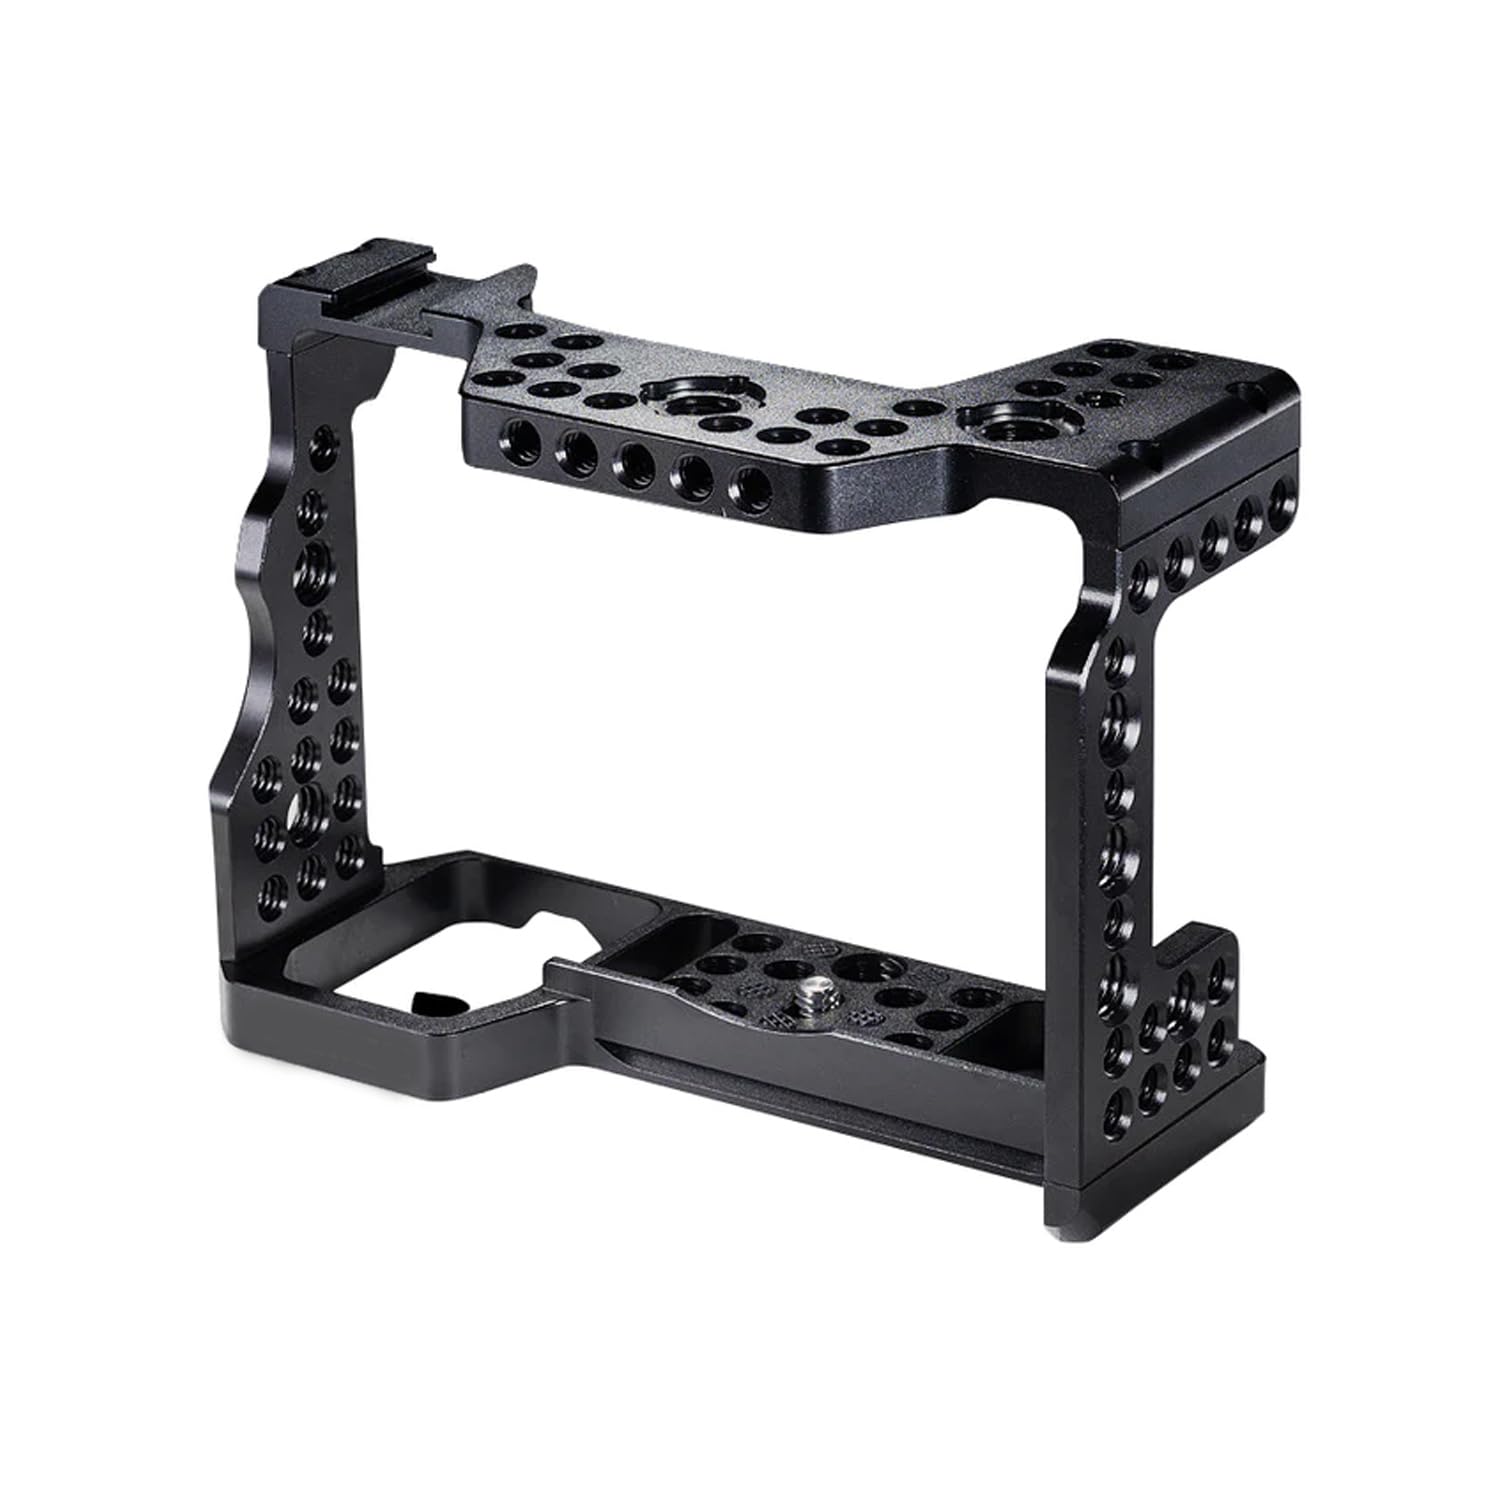 Digitek Camera Cage A7R2/R3/M3/M2/A9 Compatible with Sony A7R2 /A7R3 /A9 /A7M3 /A73 /A72 /A7M2 | Aluminum Form-Fitted Cage with HDMI Cable Clamp &amp; Quick Tripod Mounting